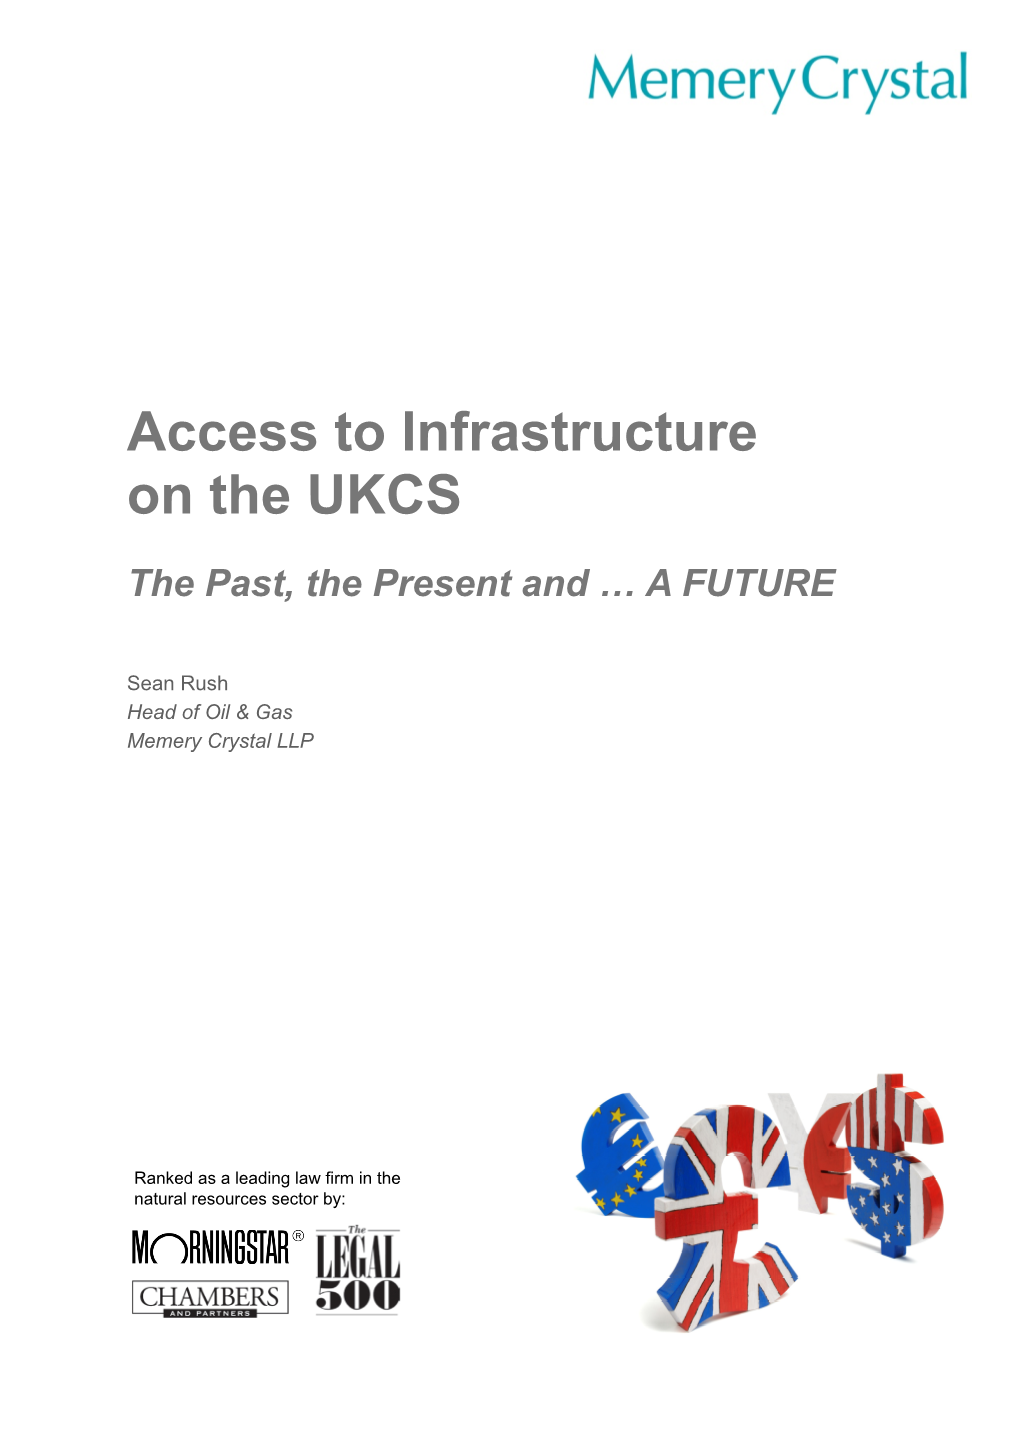 Access to Infrastructure on the UKCS